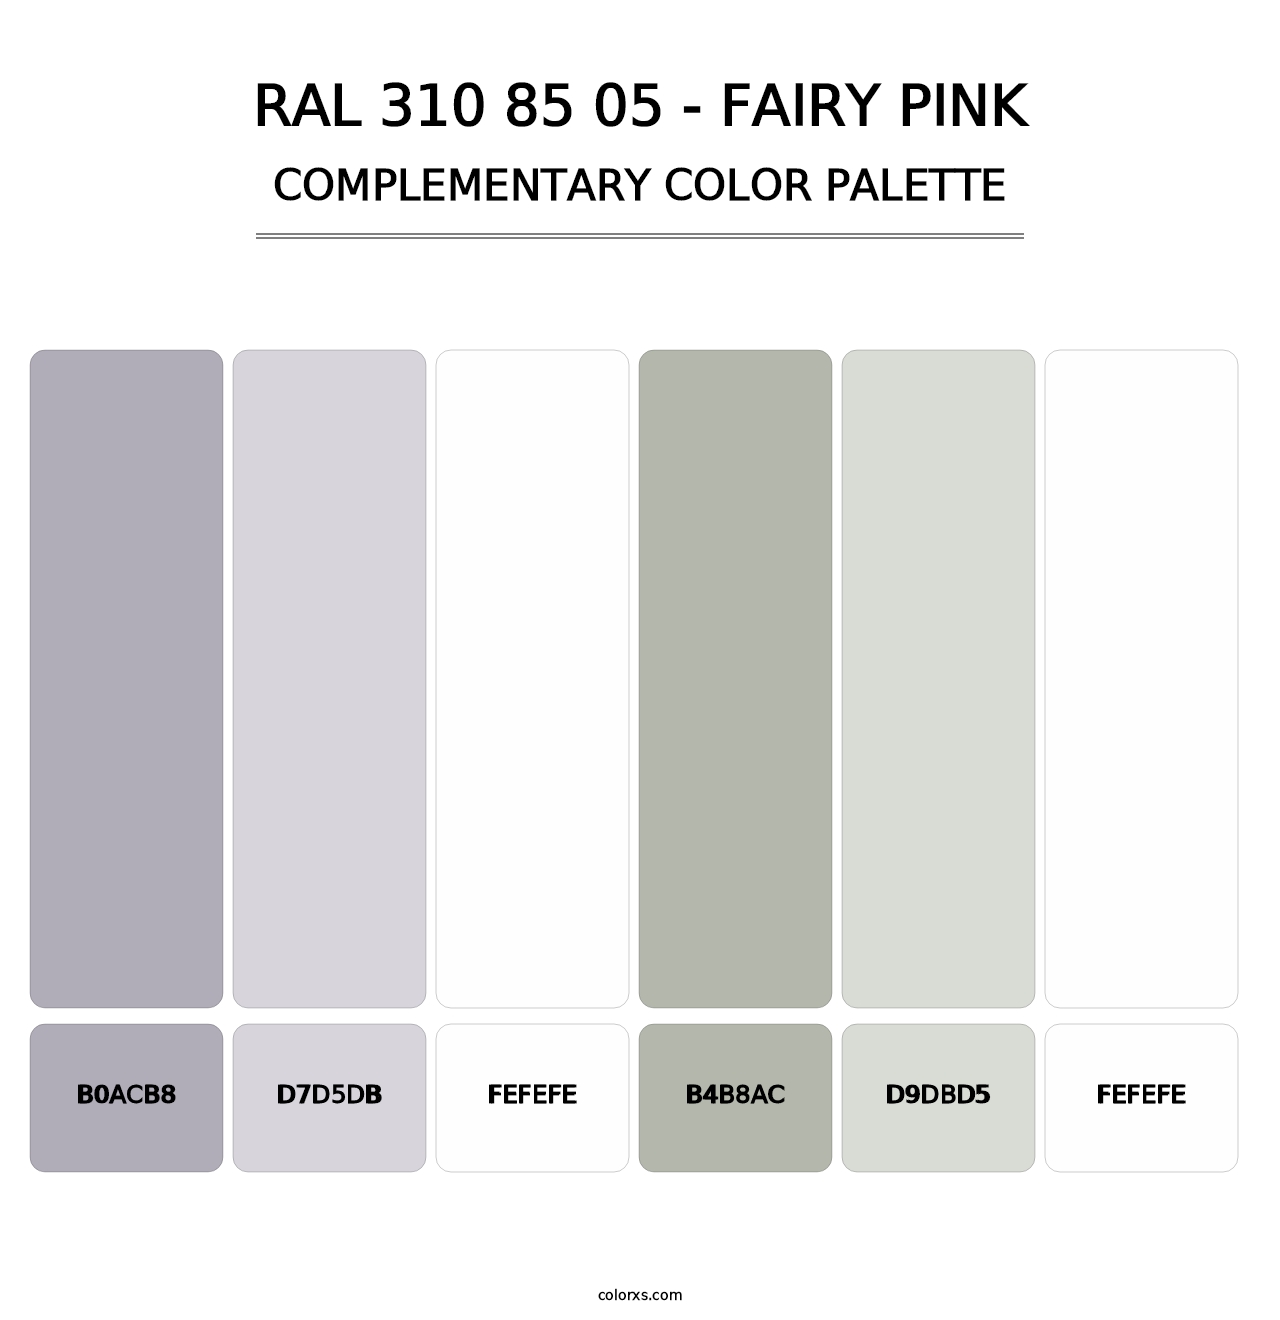 RAL 310 85 05 - Fairy Pink - Complementary Color Palette